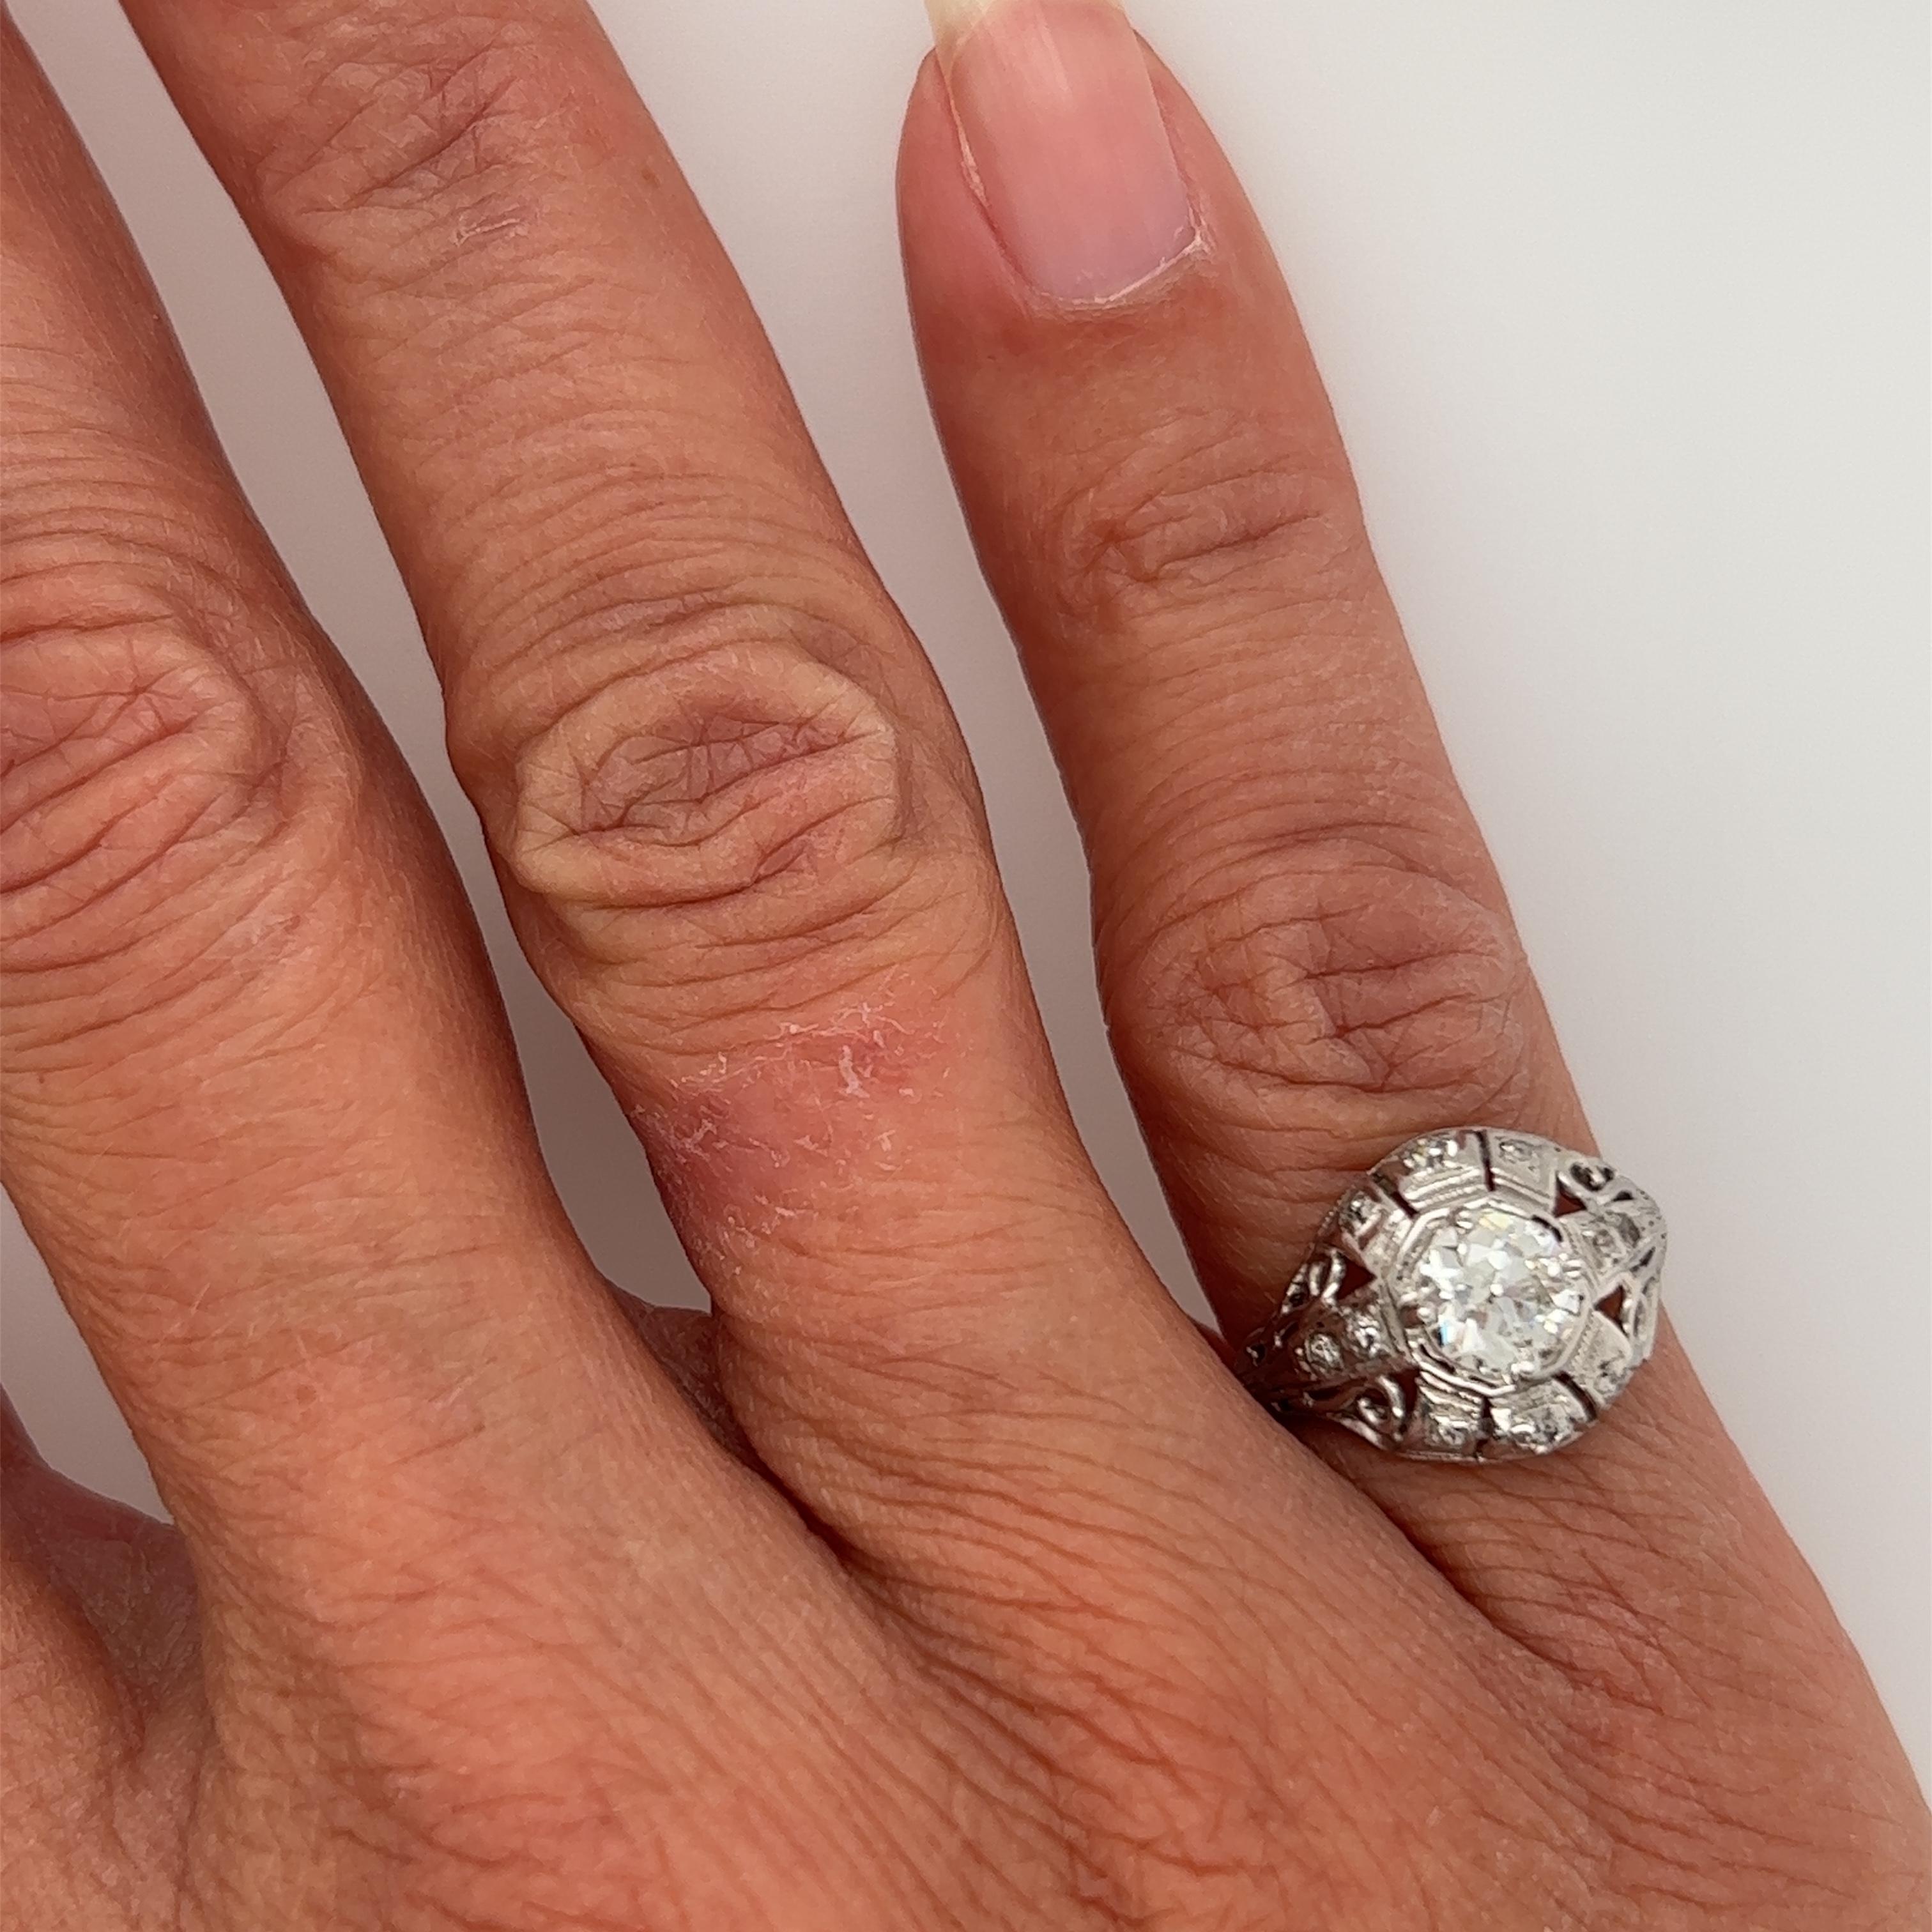 Genuine Original Art Deco Antique from the 1920's EGL Certified .87ct Diamond Ring Platinum



Featuring a Spectacular Genuine Natural Mined .67ct H-SI1 Old European Cut Diamond

World Renowned Universal Gemological Services, Independent Appraisal